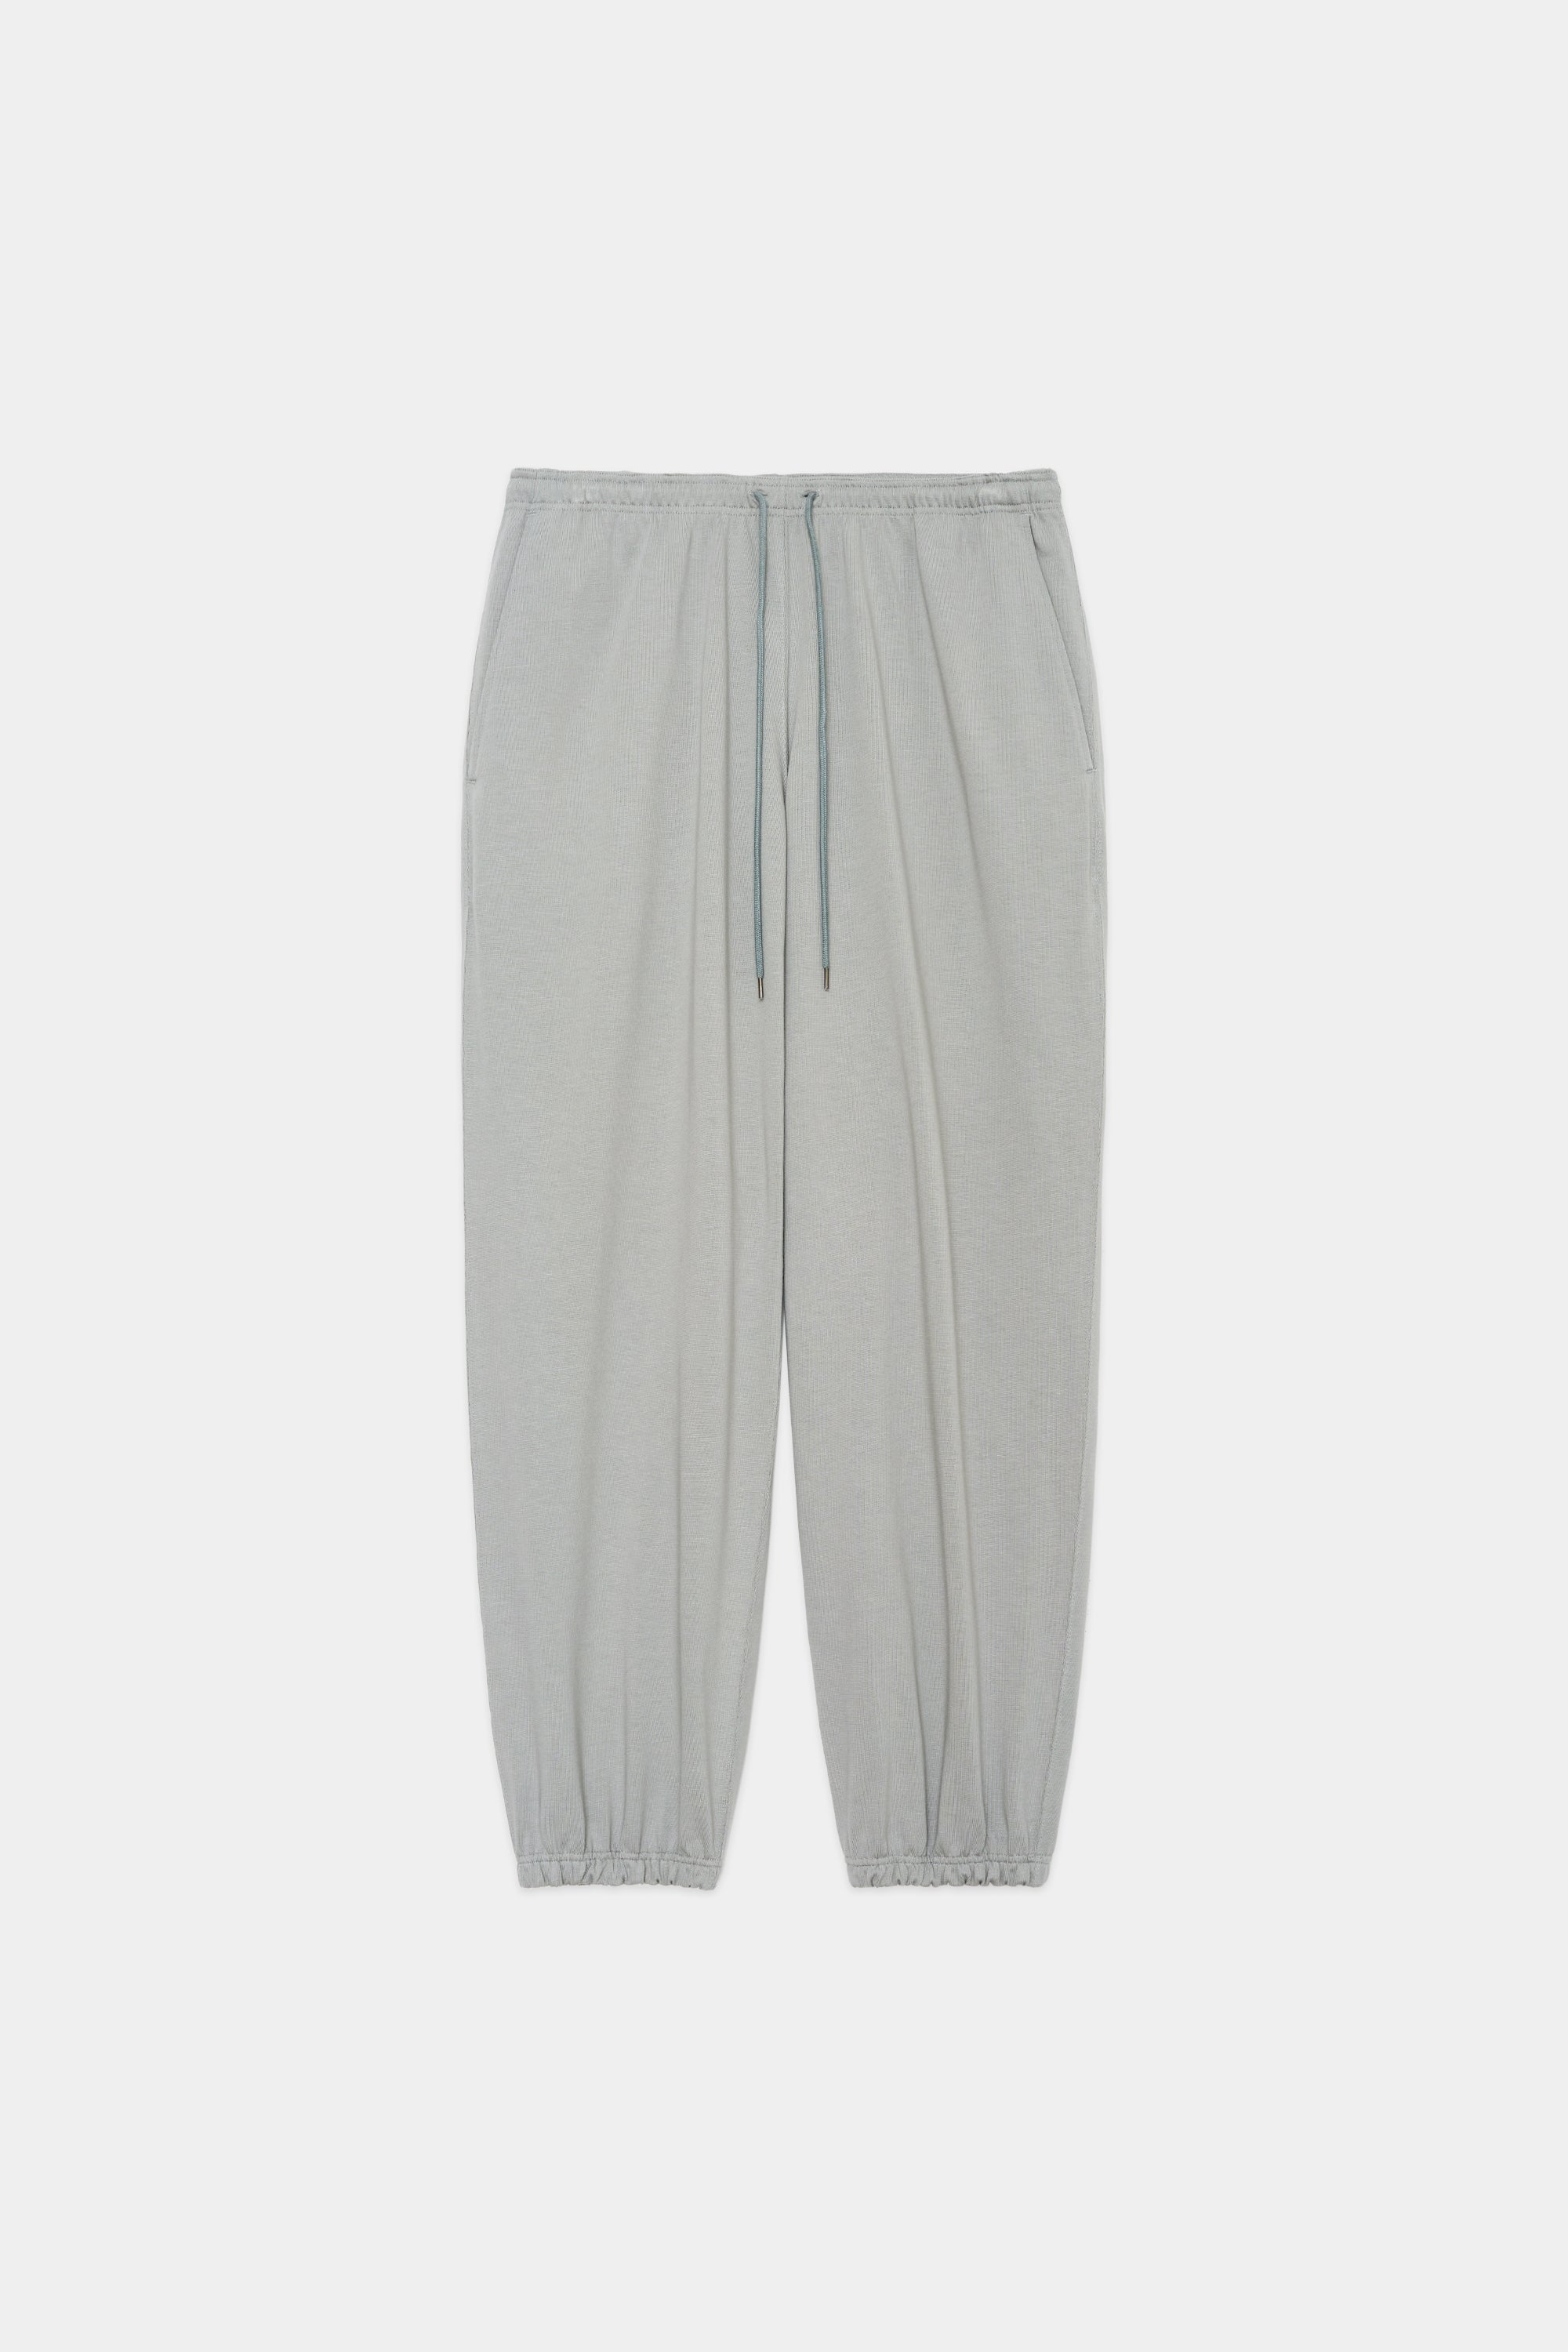 20//1 RECYCLE SUVIN ORGANIC COTTON KNIT EASY PANTS WIDE, Sky Gray